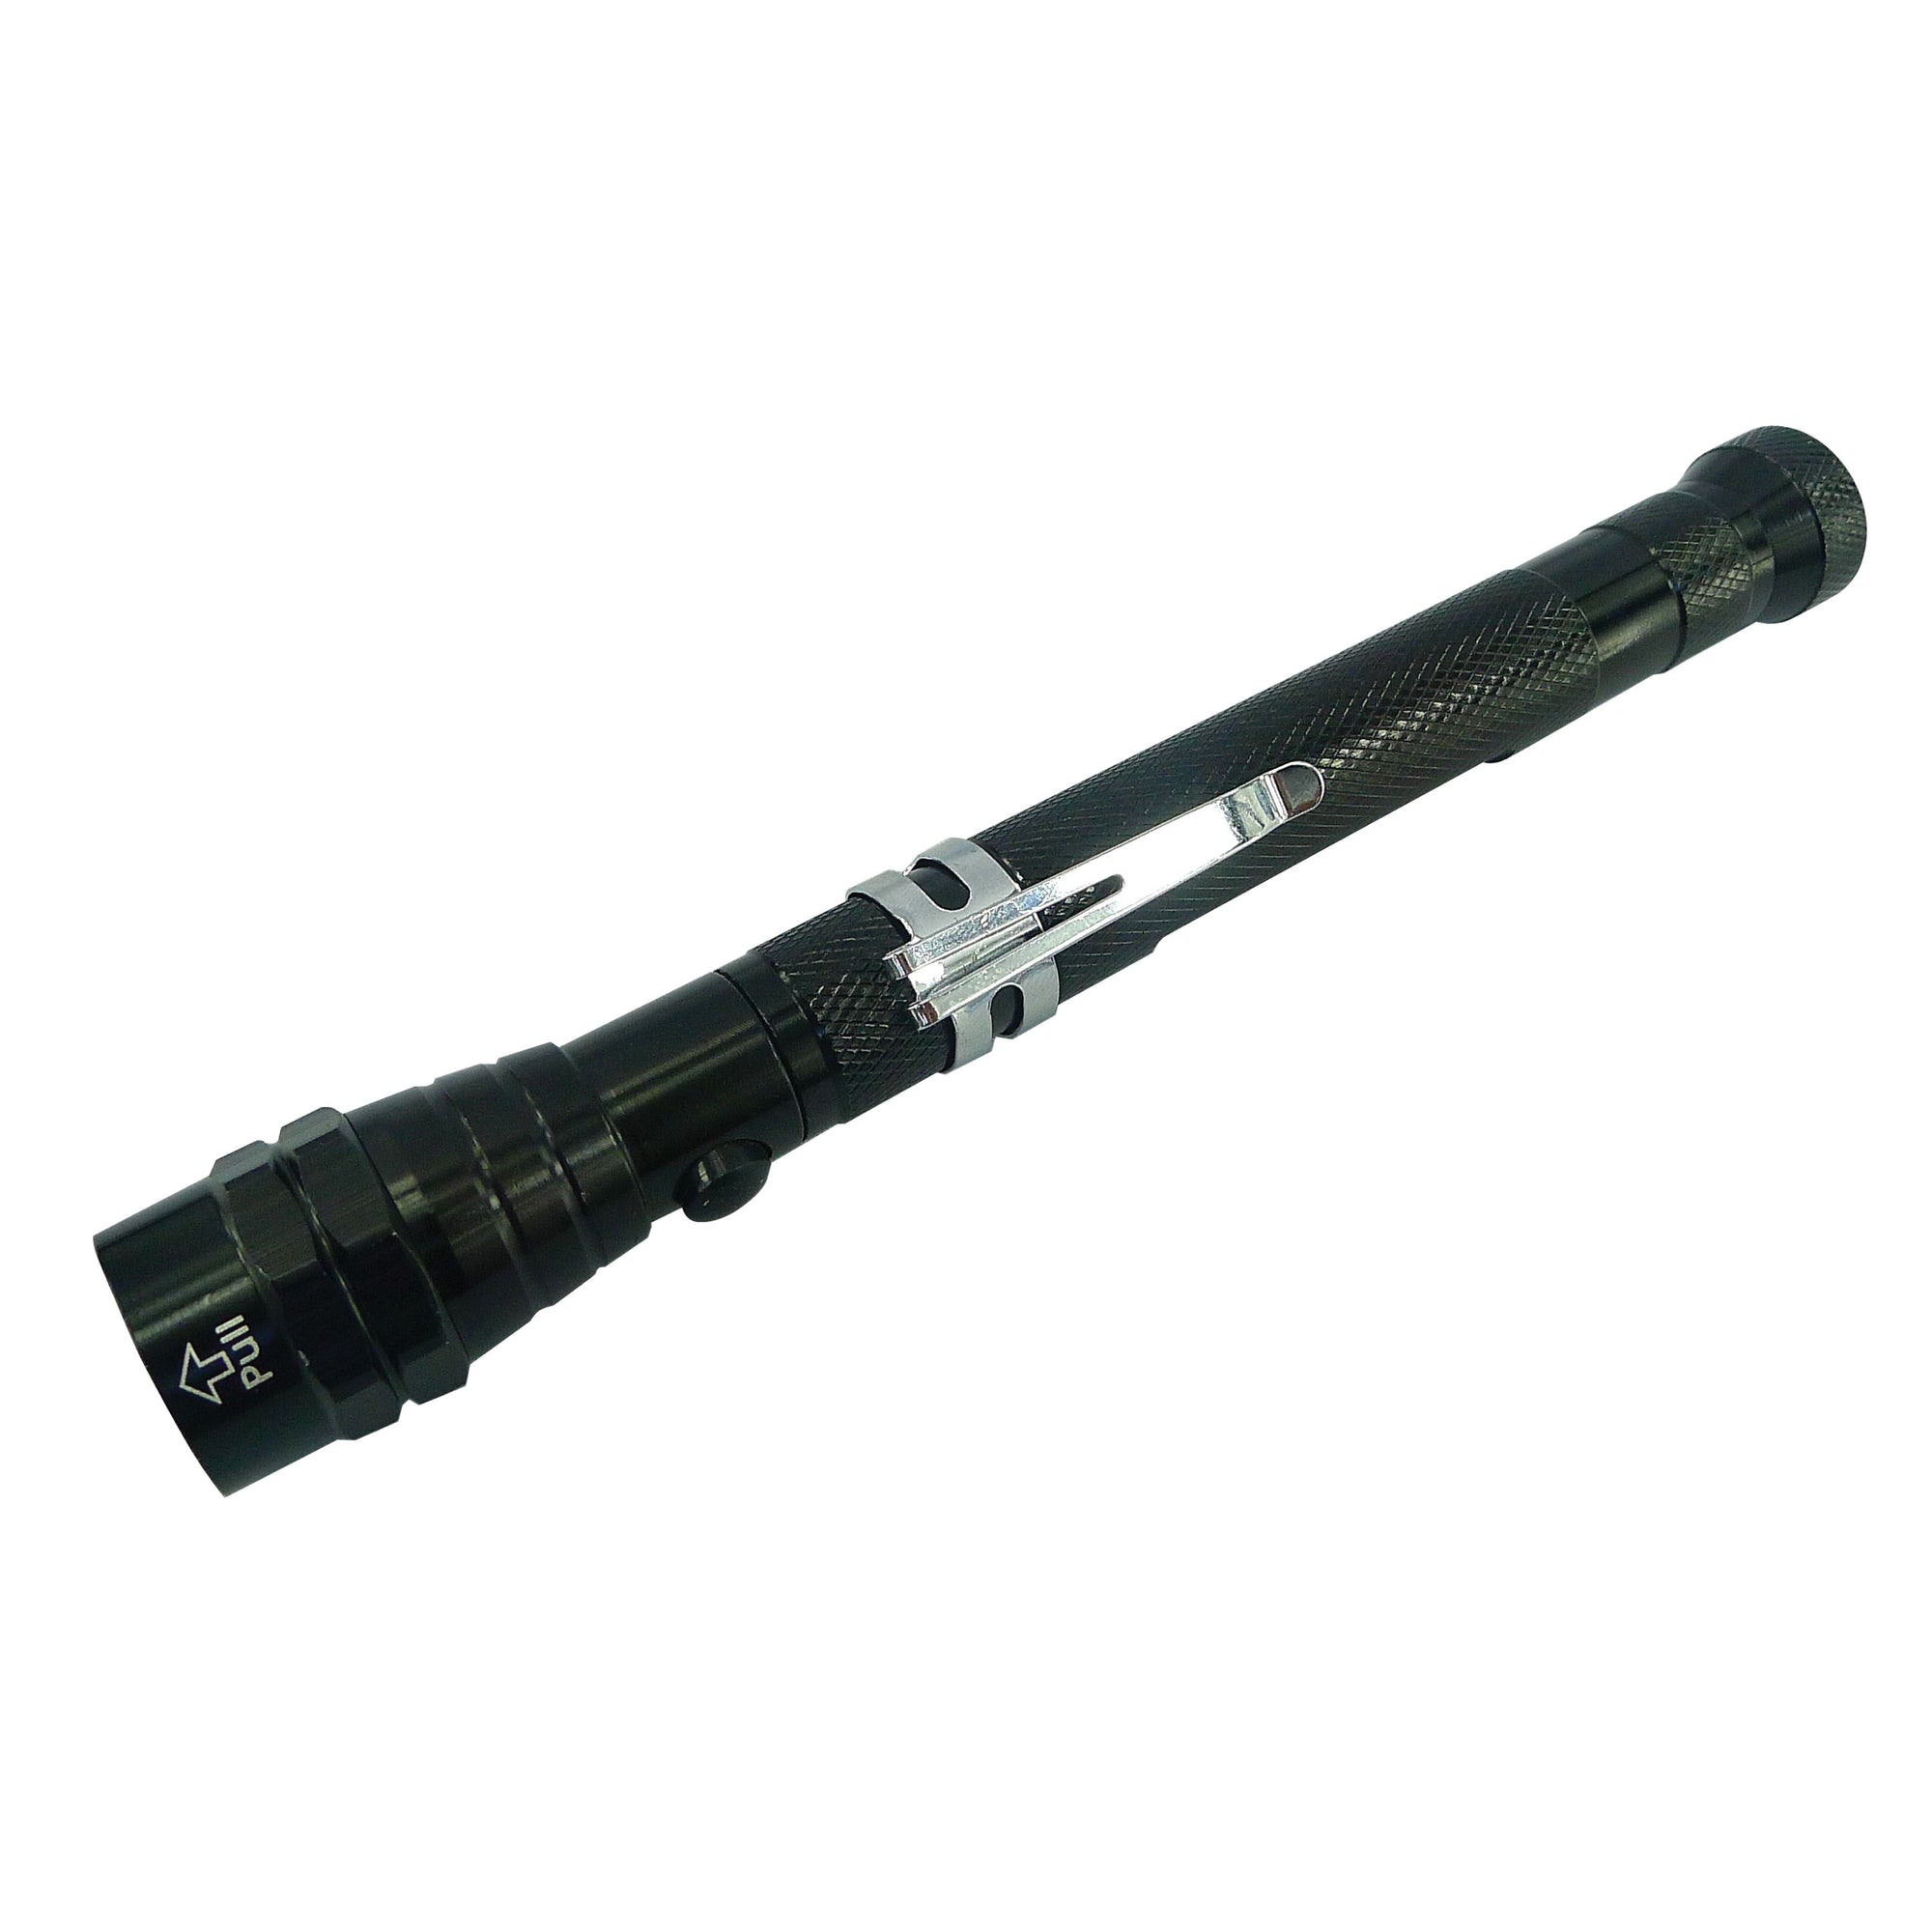 Ming's Mark GW29004 LED Telescopic Magnetic Flashlight and Pickup Tool